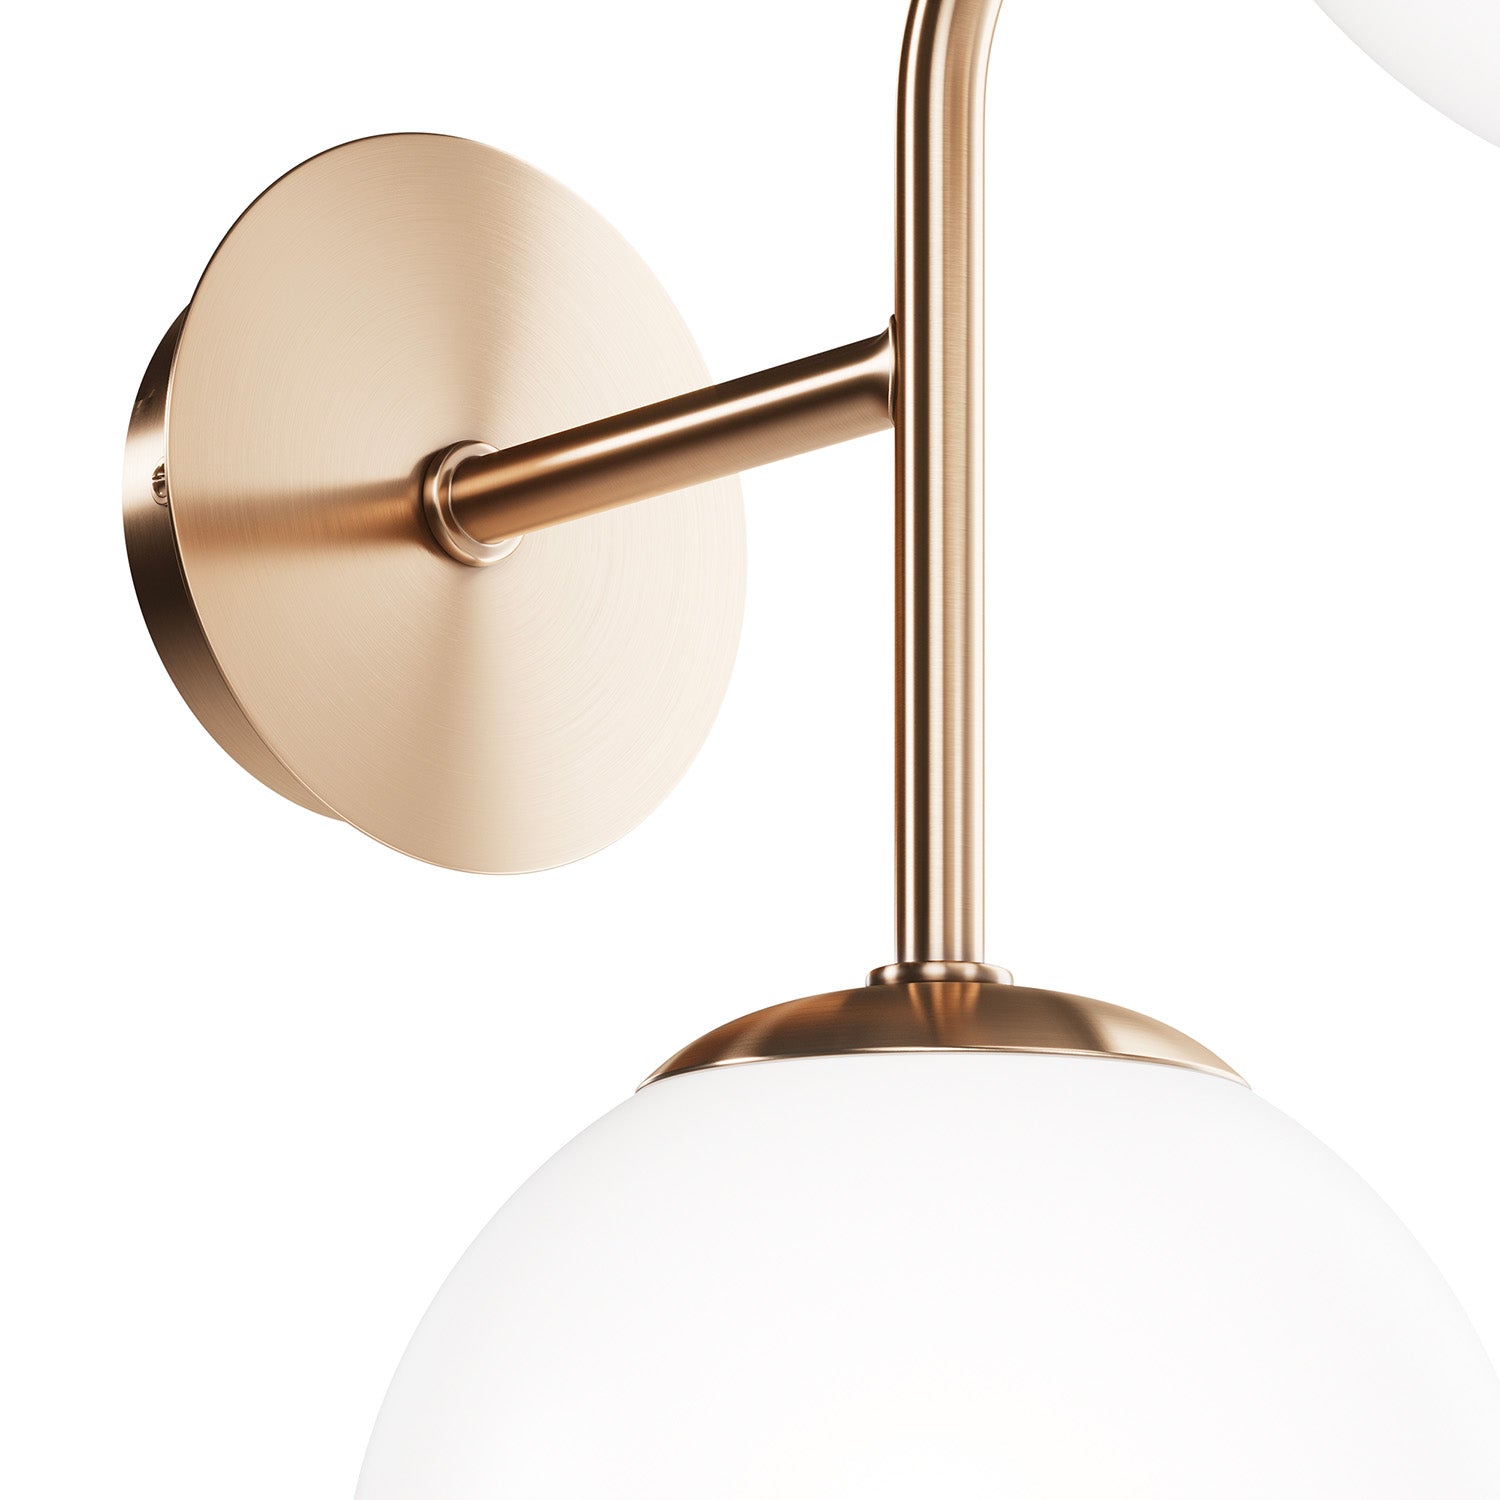 ERICH - Vintage gold or chrome wall light with glass ball